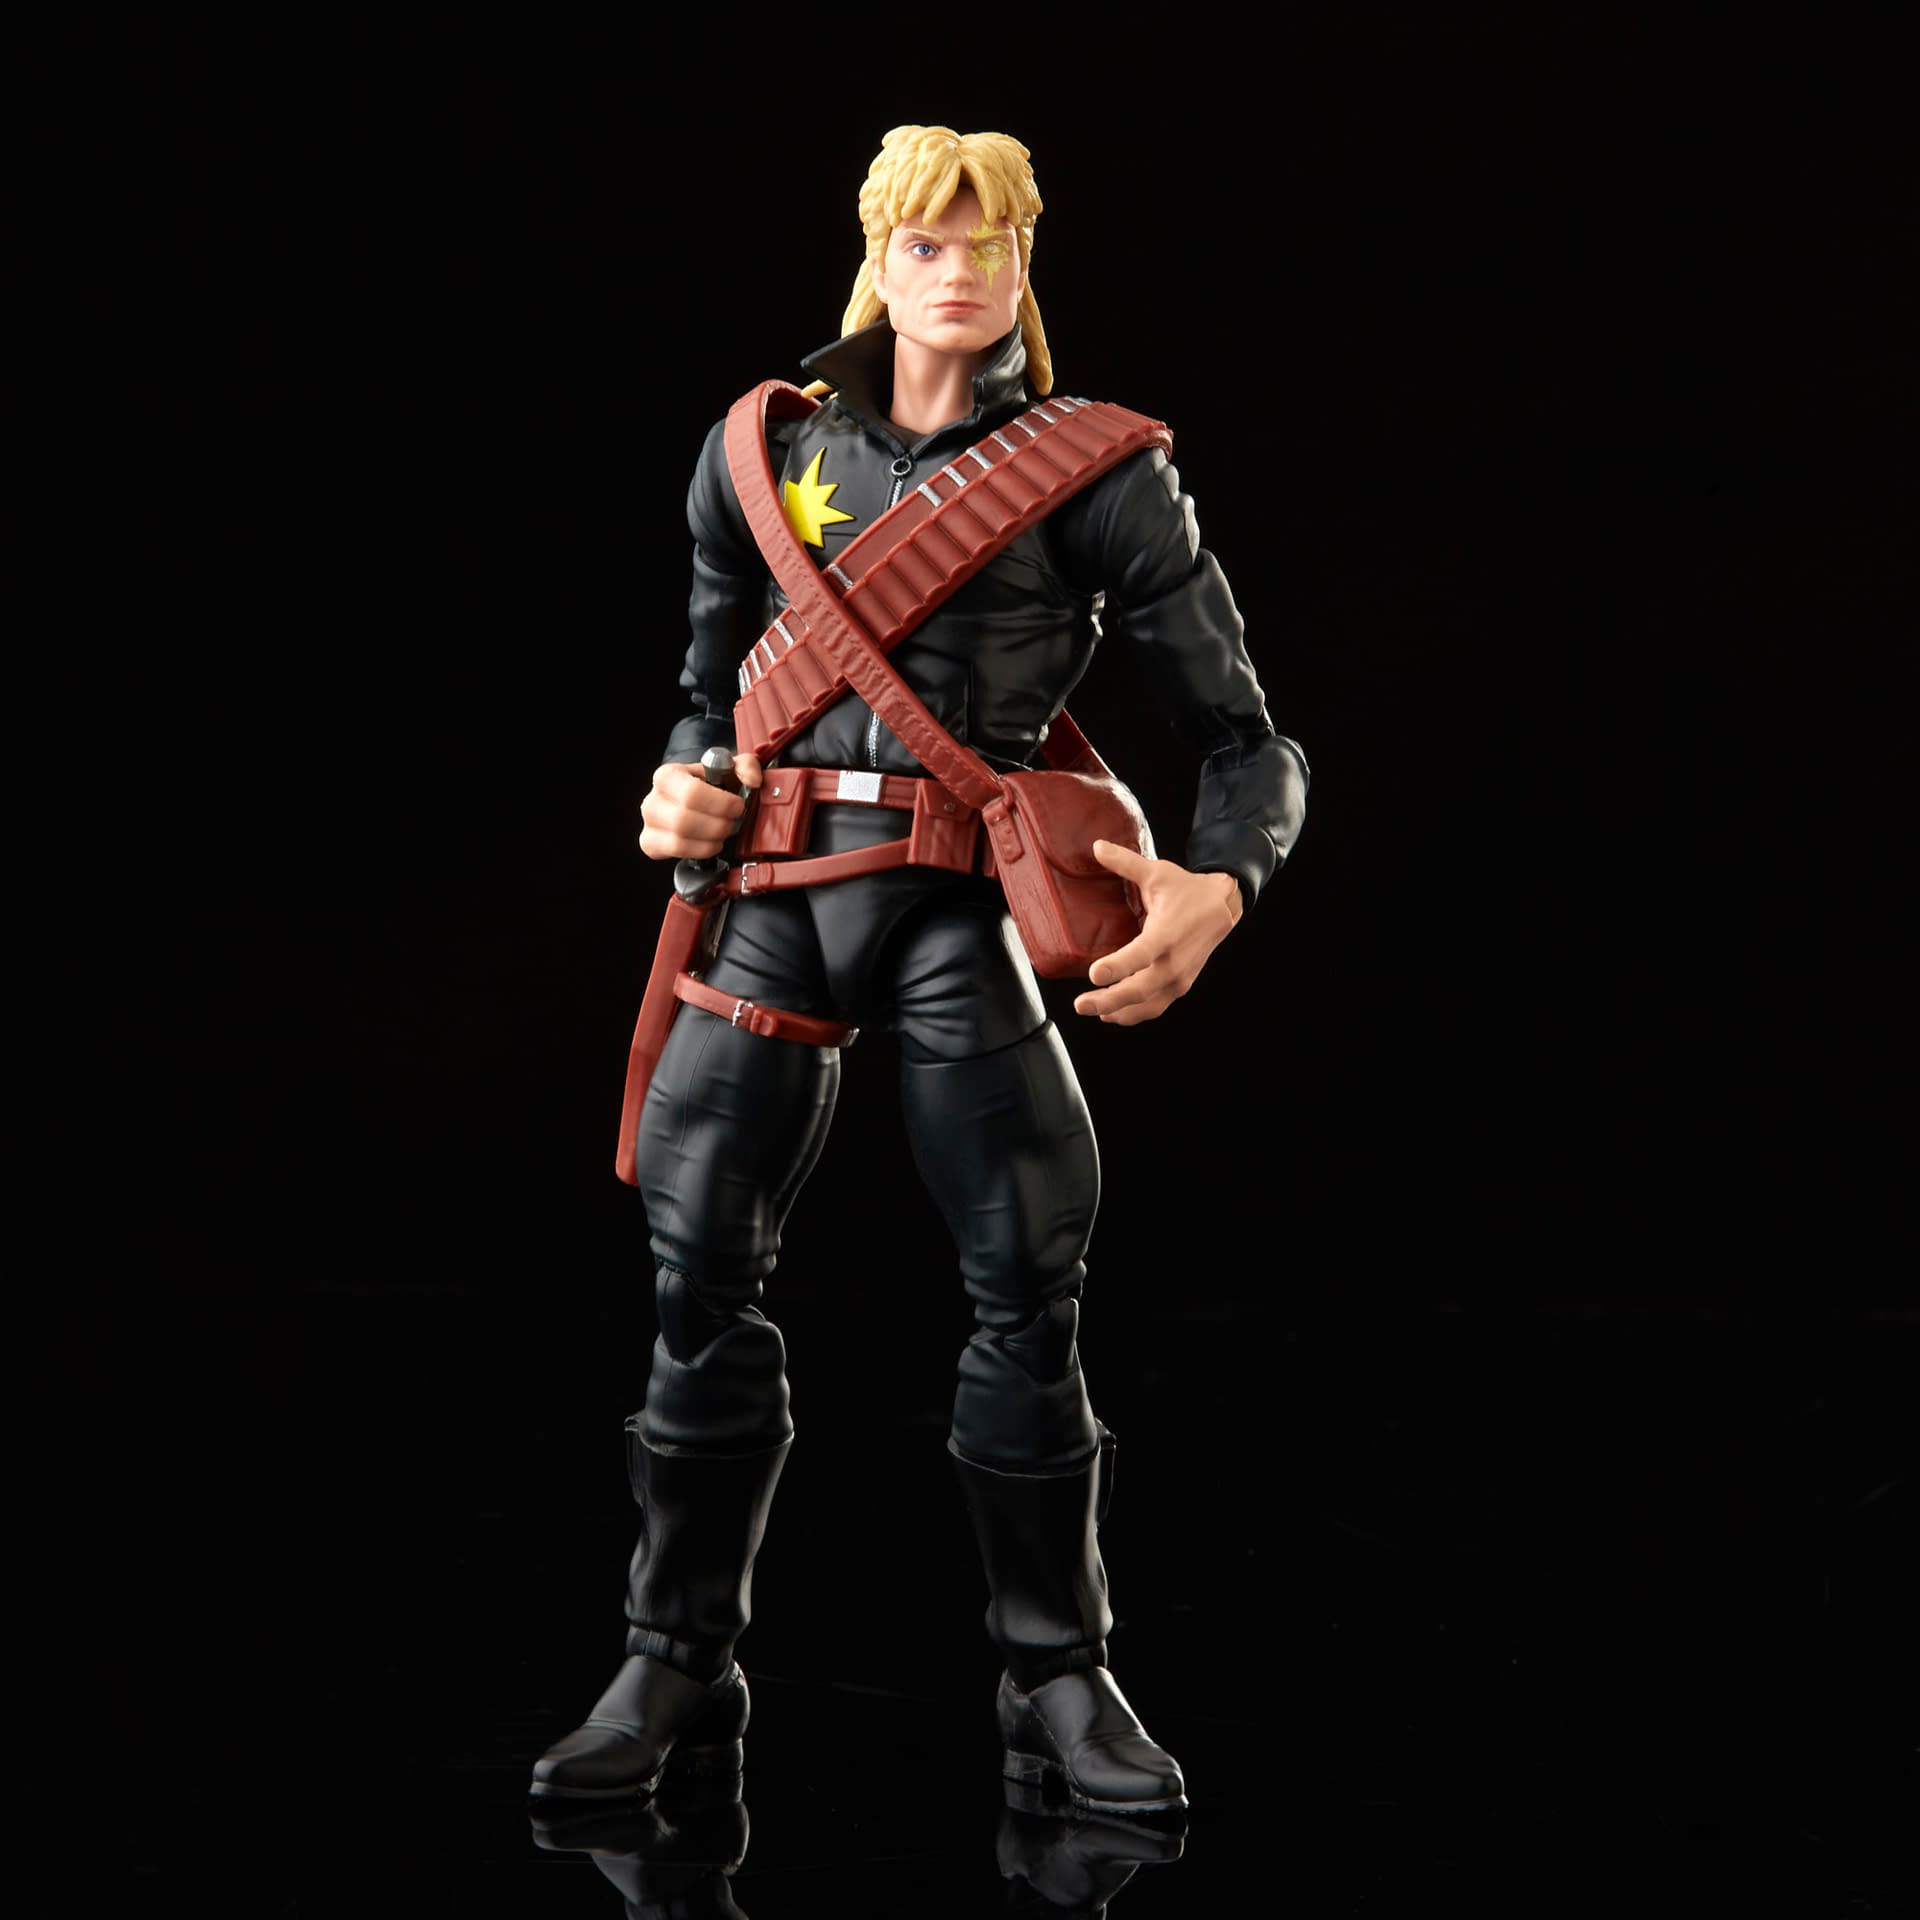 The Luck of X-Men's Longshot Arrives at Hasbro with Marvel Legends 